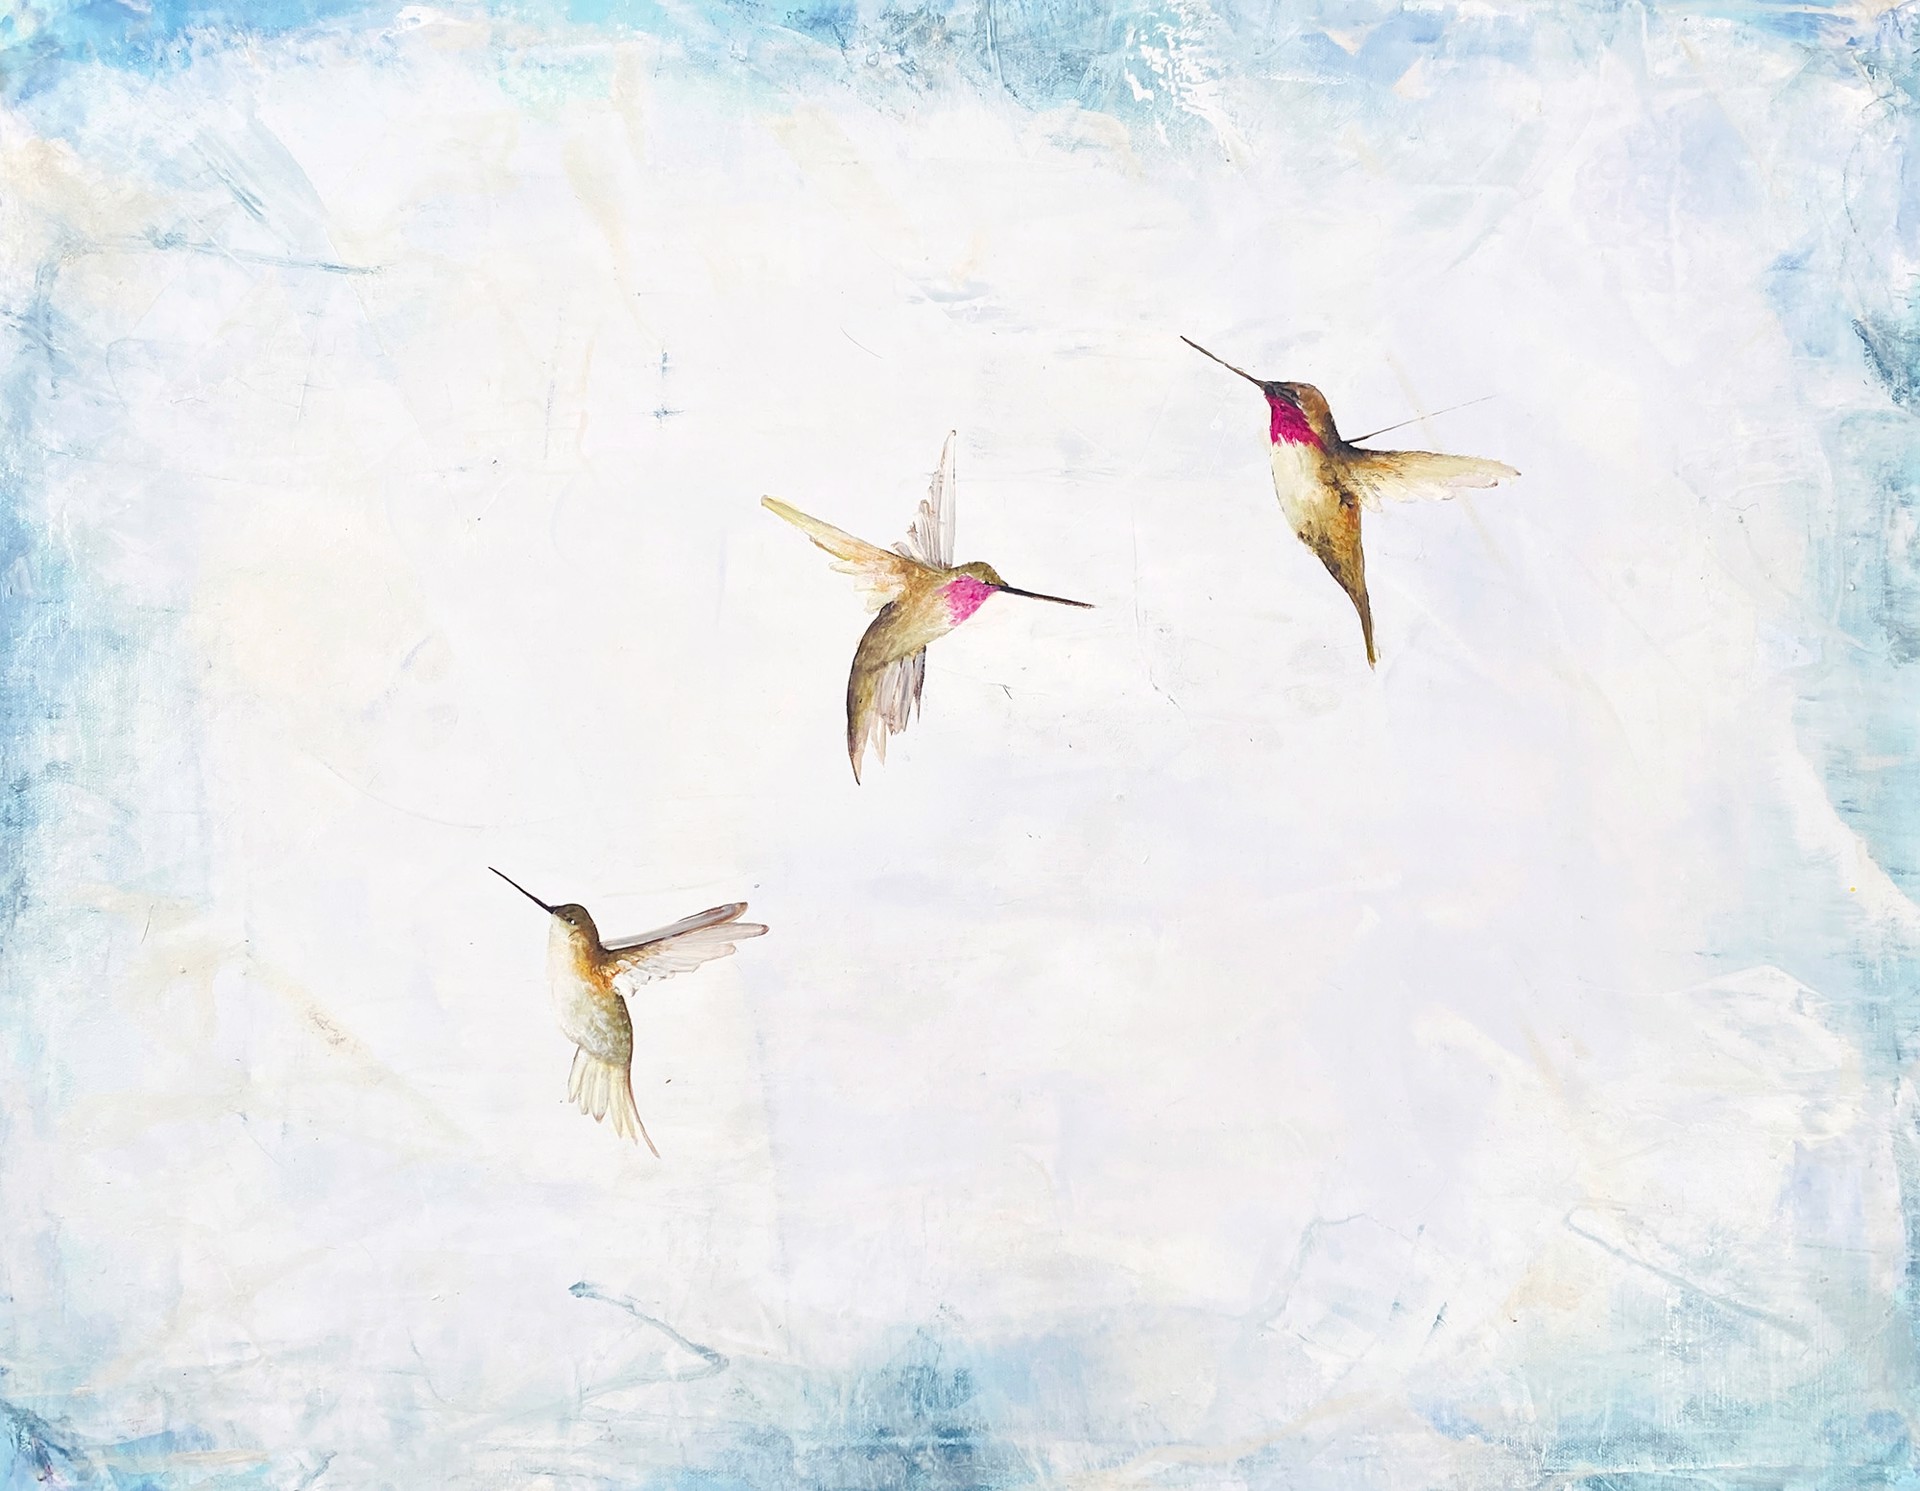 Original Oil Painting By Jenna Von Benedikt With Hummingbirds On An Abstract Background White And Light Blue